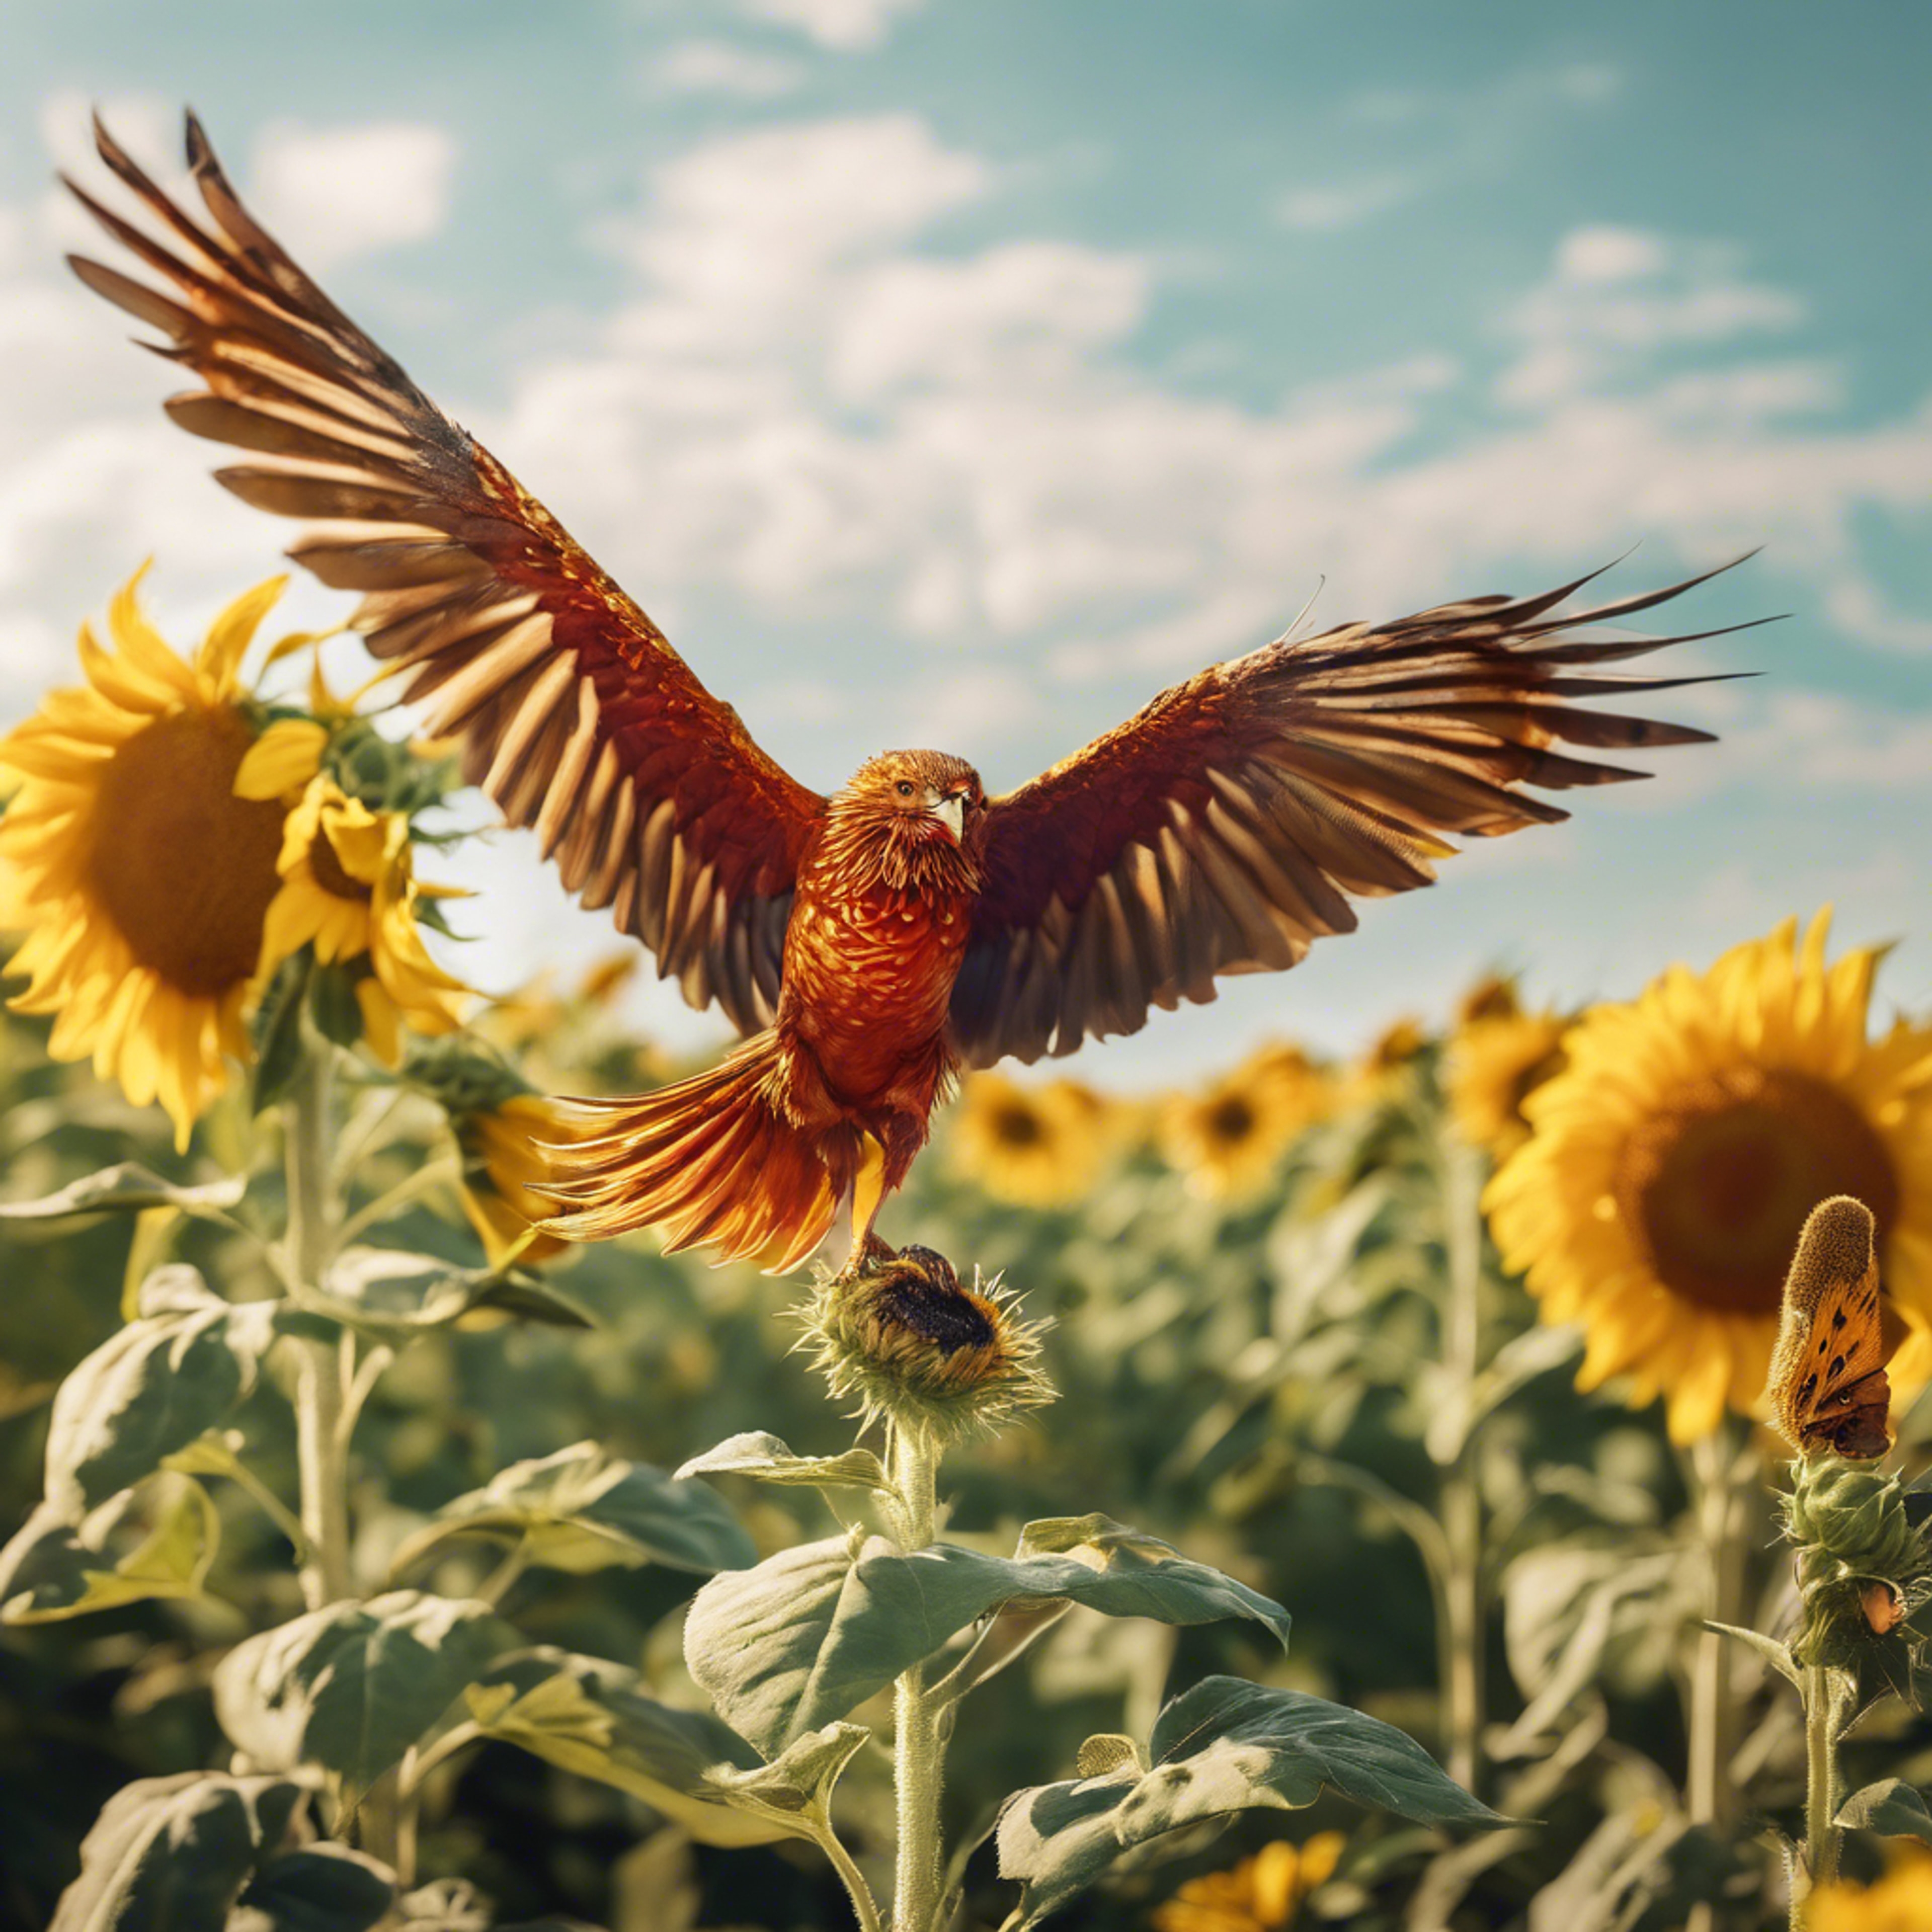 A playful phoenix bird, chasing a colourful butterfly through blooming sunflower fields under a midday sun.壁紙[bc15a17625c349d58785]